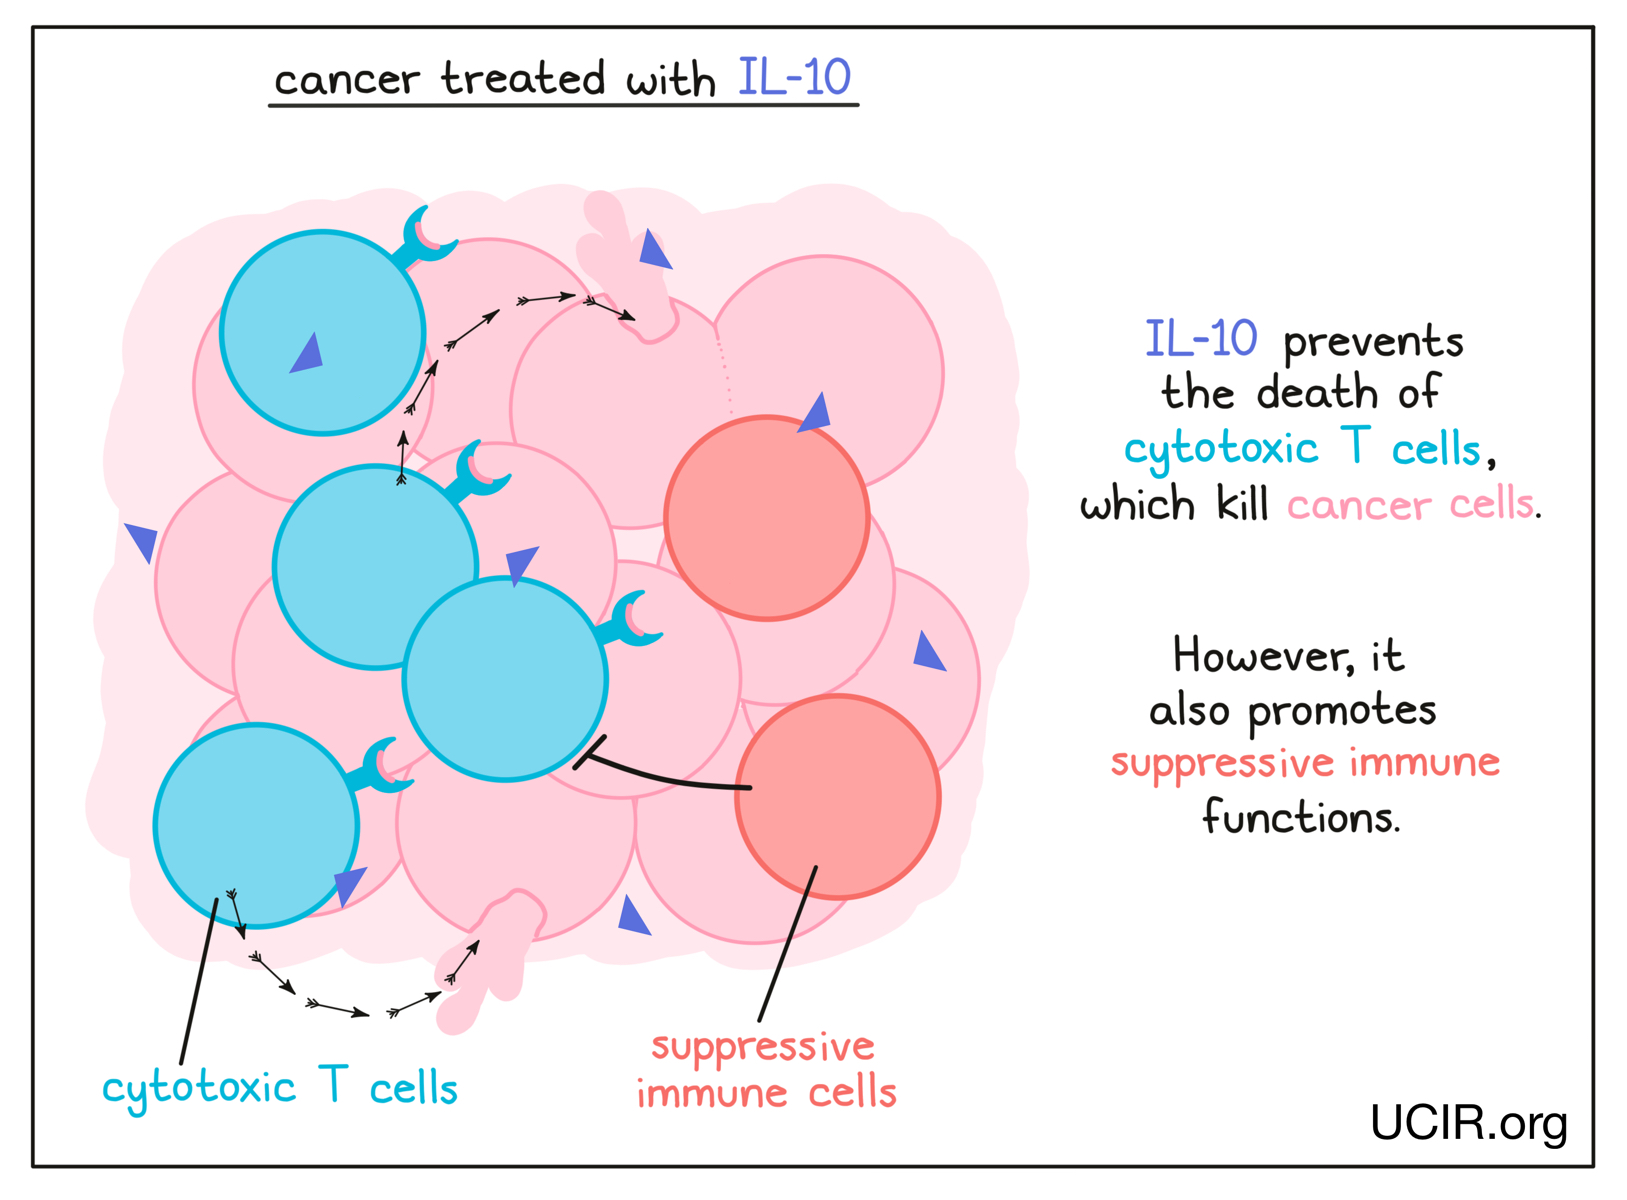 Illustration showing a cancer treated with IL-10